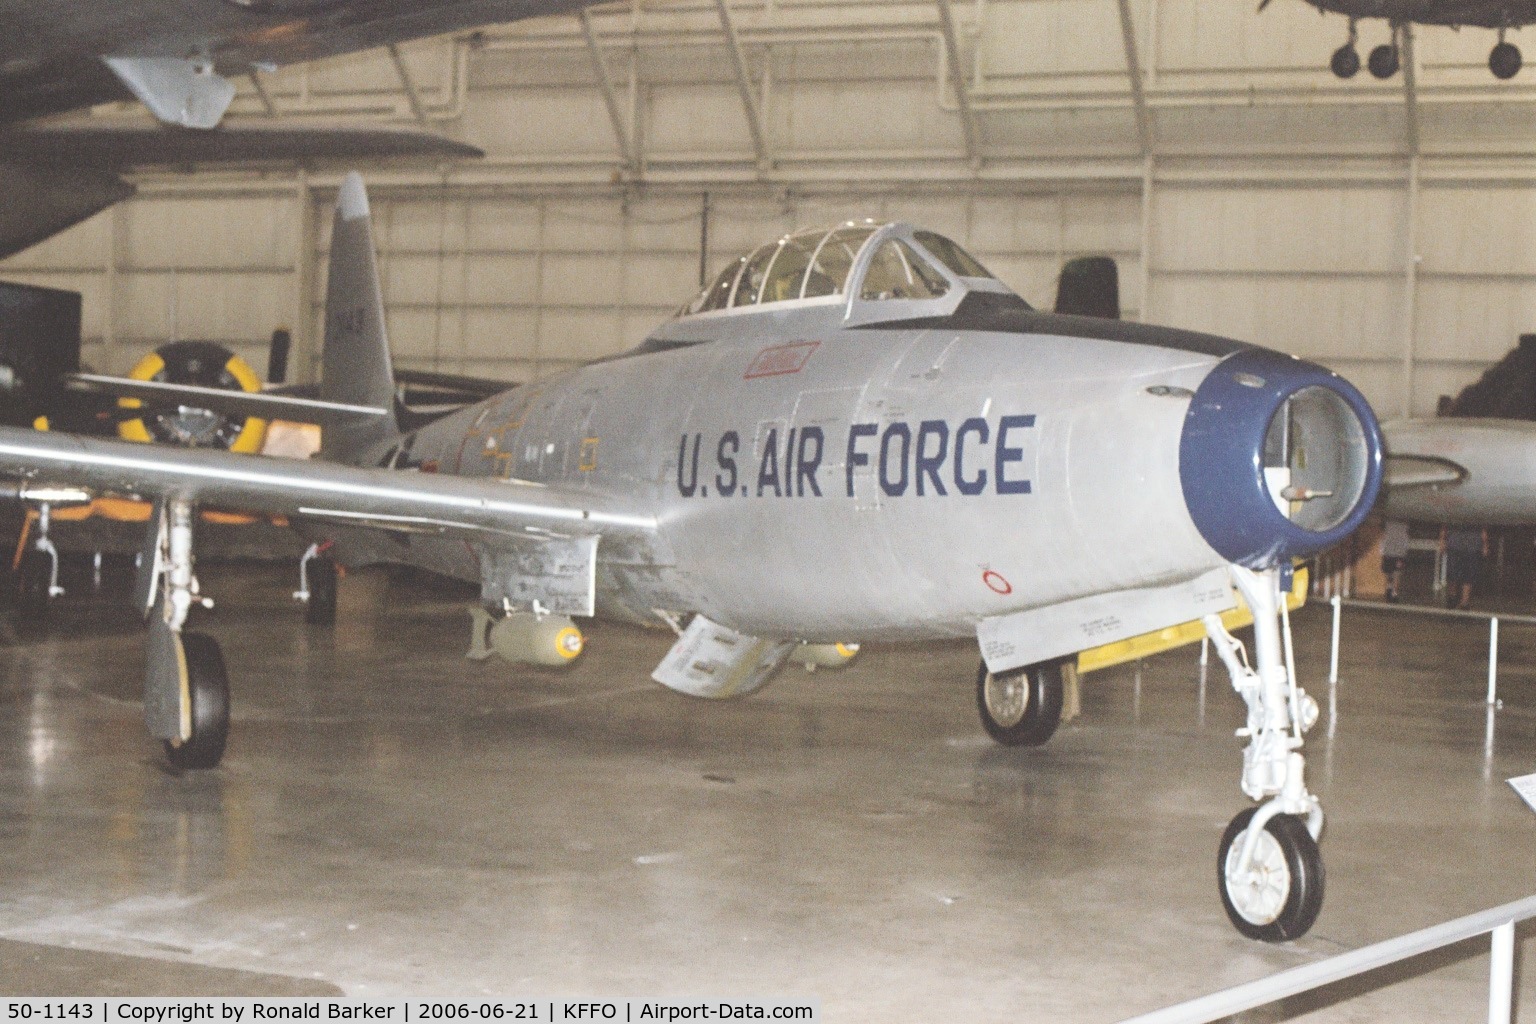 50-1143, 1950 Republic F-84E-20-RE Thunderjet C/N Not found 50-1143, National Museum of the Air Force